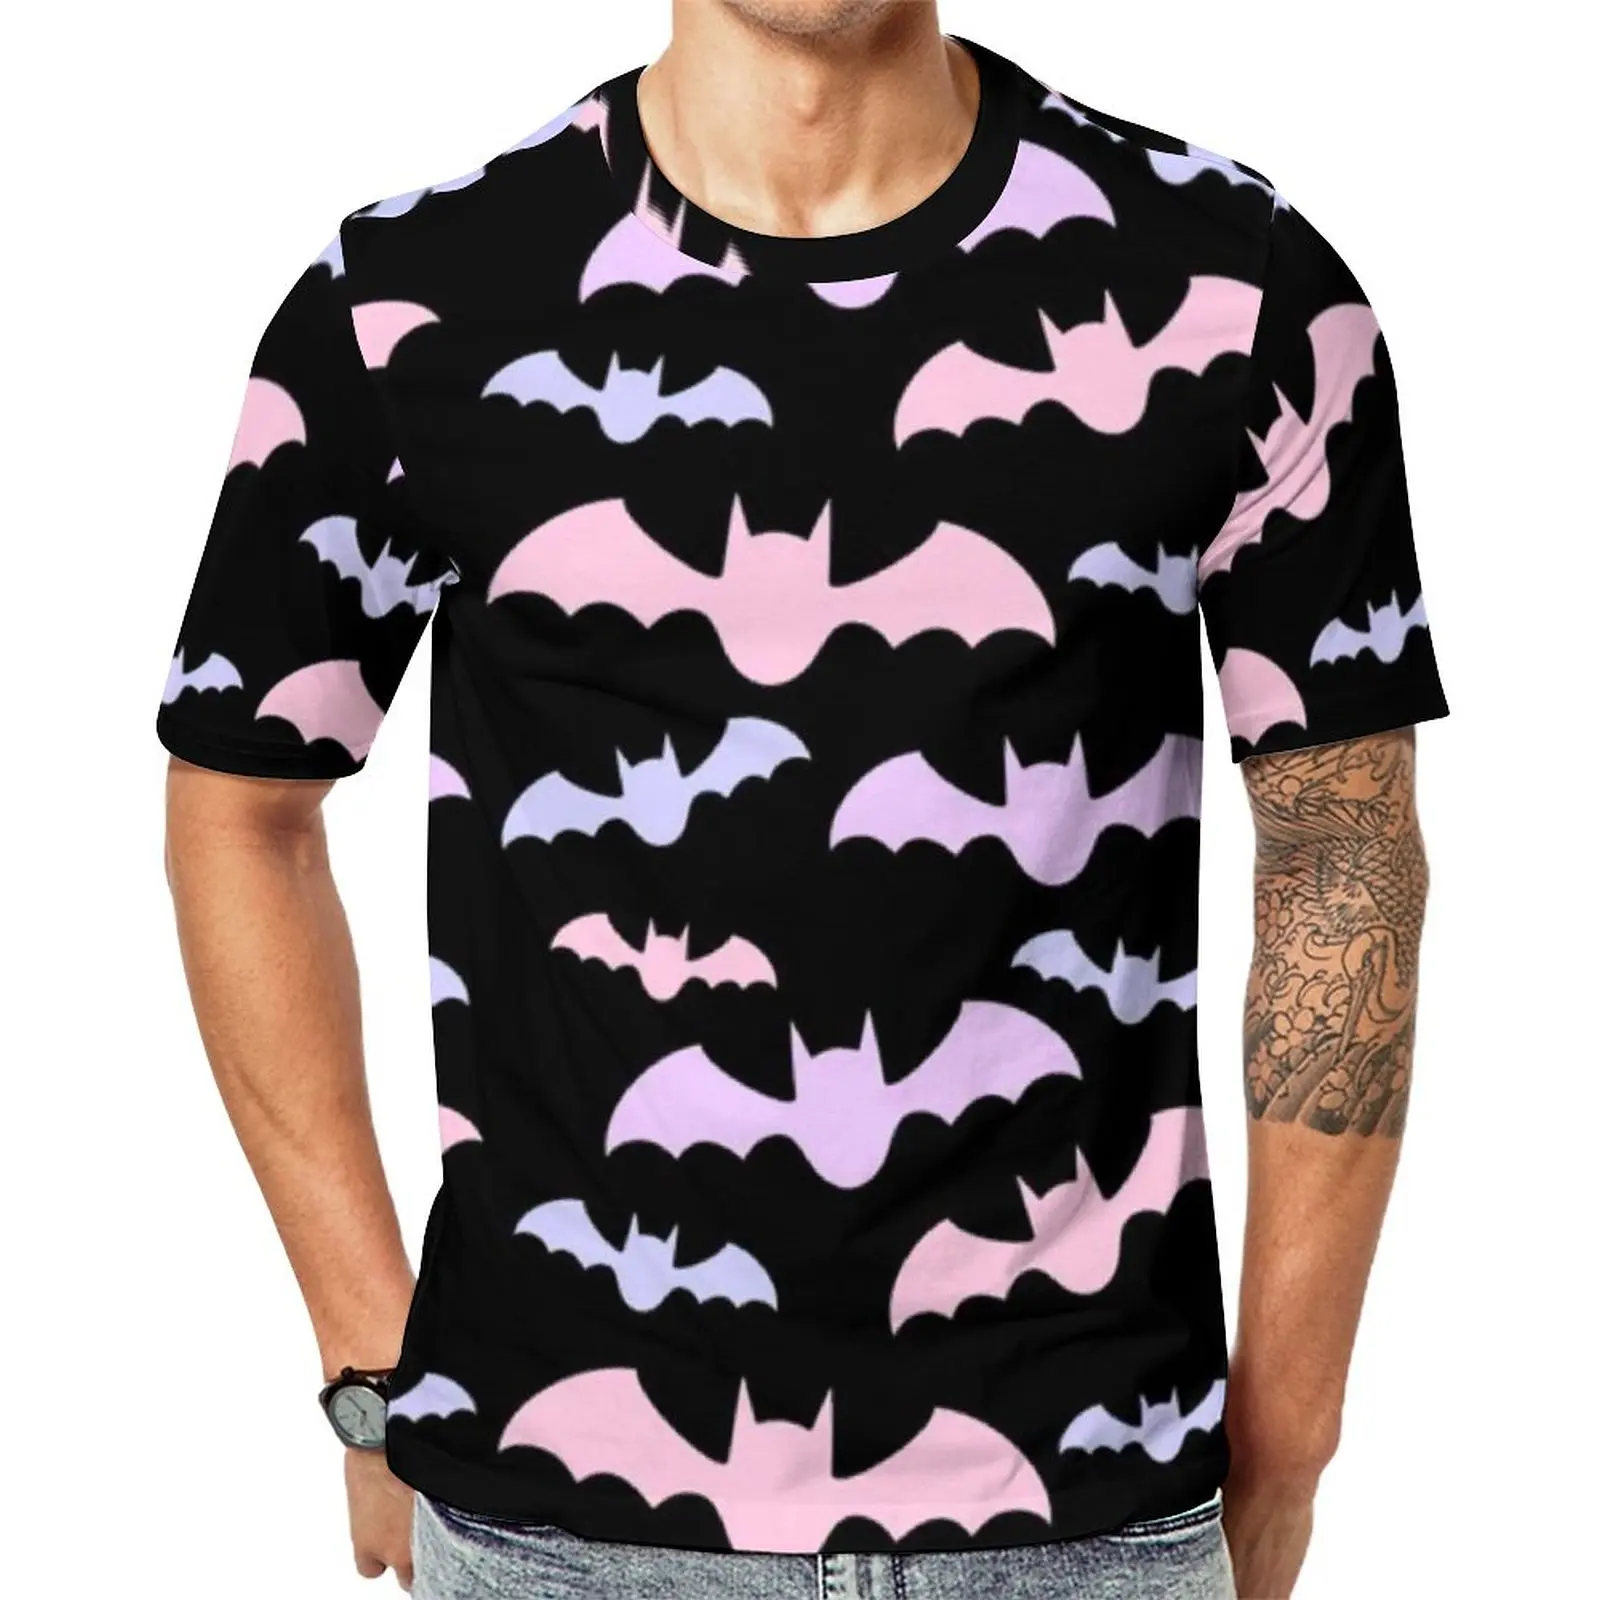 

Pastel Bat Print T-Shirt Spooky Aesthetic Hippie T Shirts Short Sleeves Graphic Tshirt Wholesale Summer Basic Oversize Top Tees